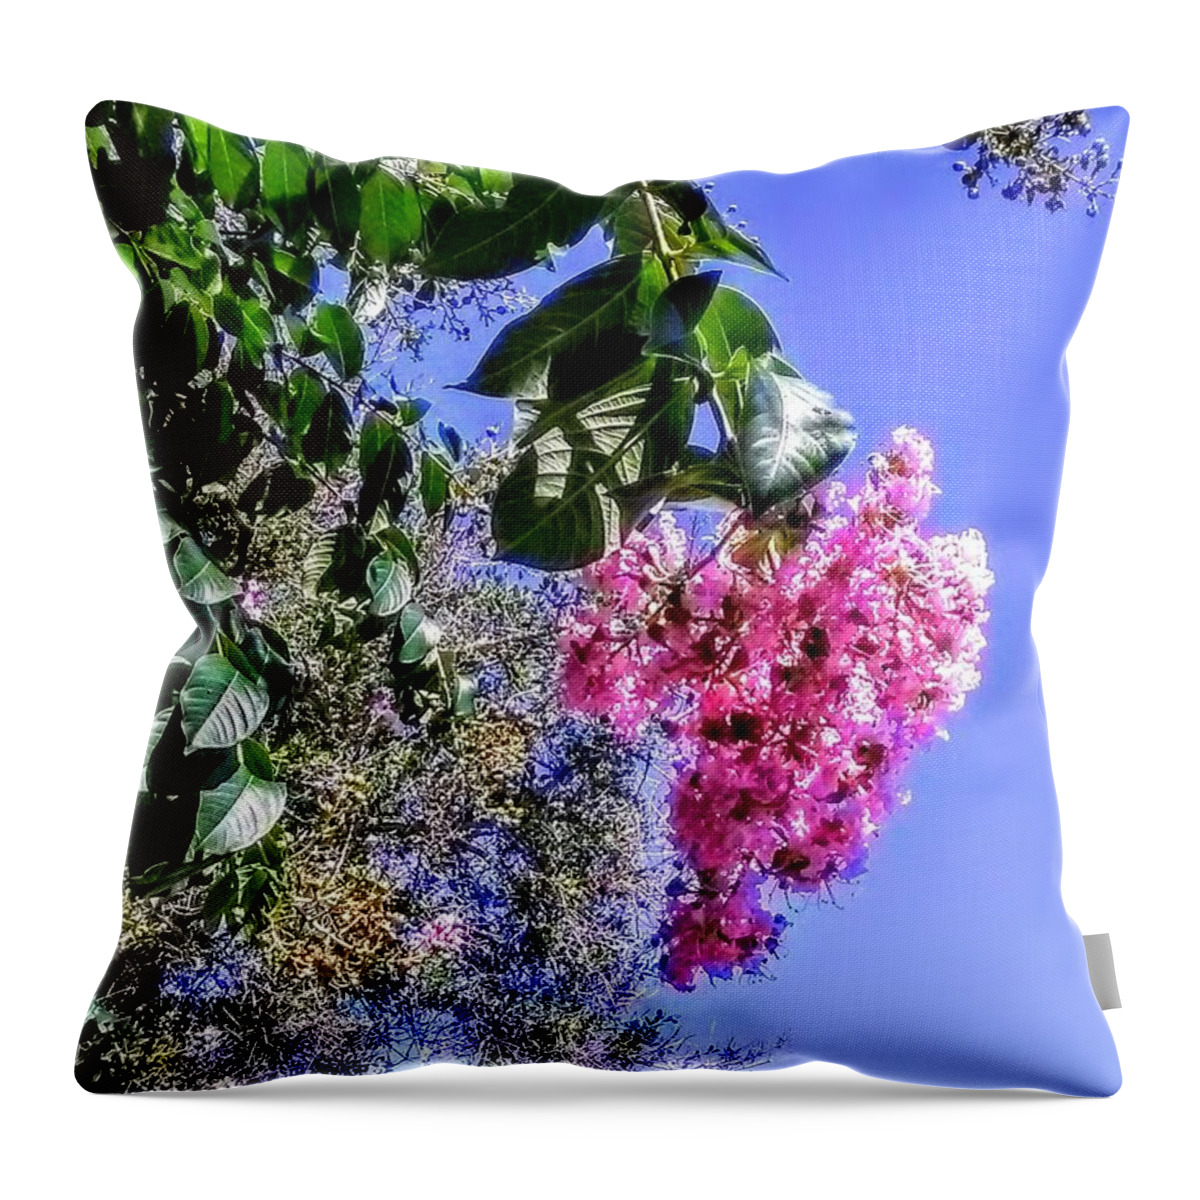 Flowering Tree Throw Pillow featuring the photograph Floral Essence by Suzanne Berthier